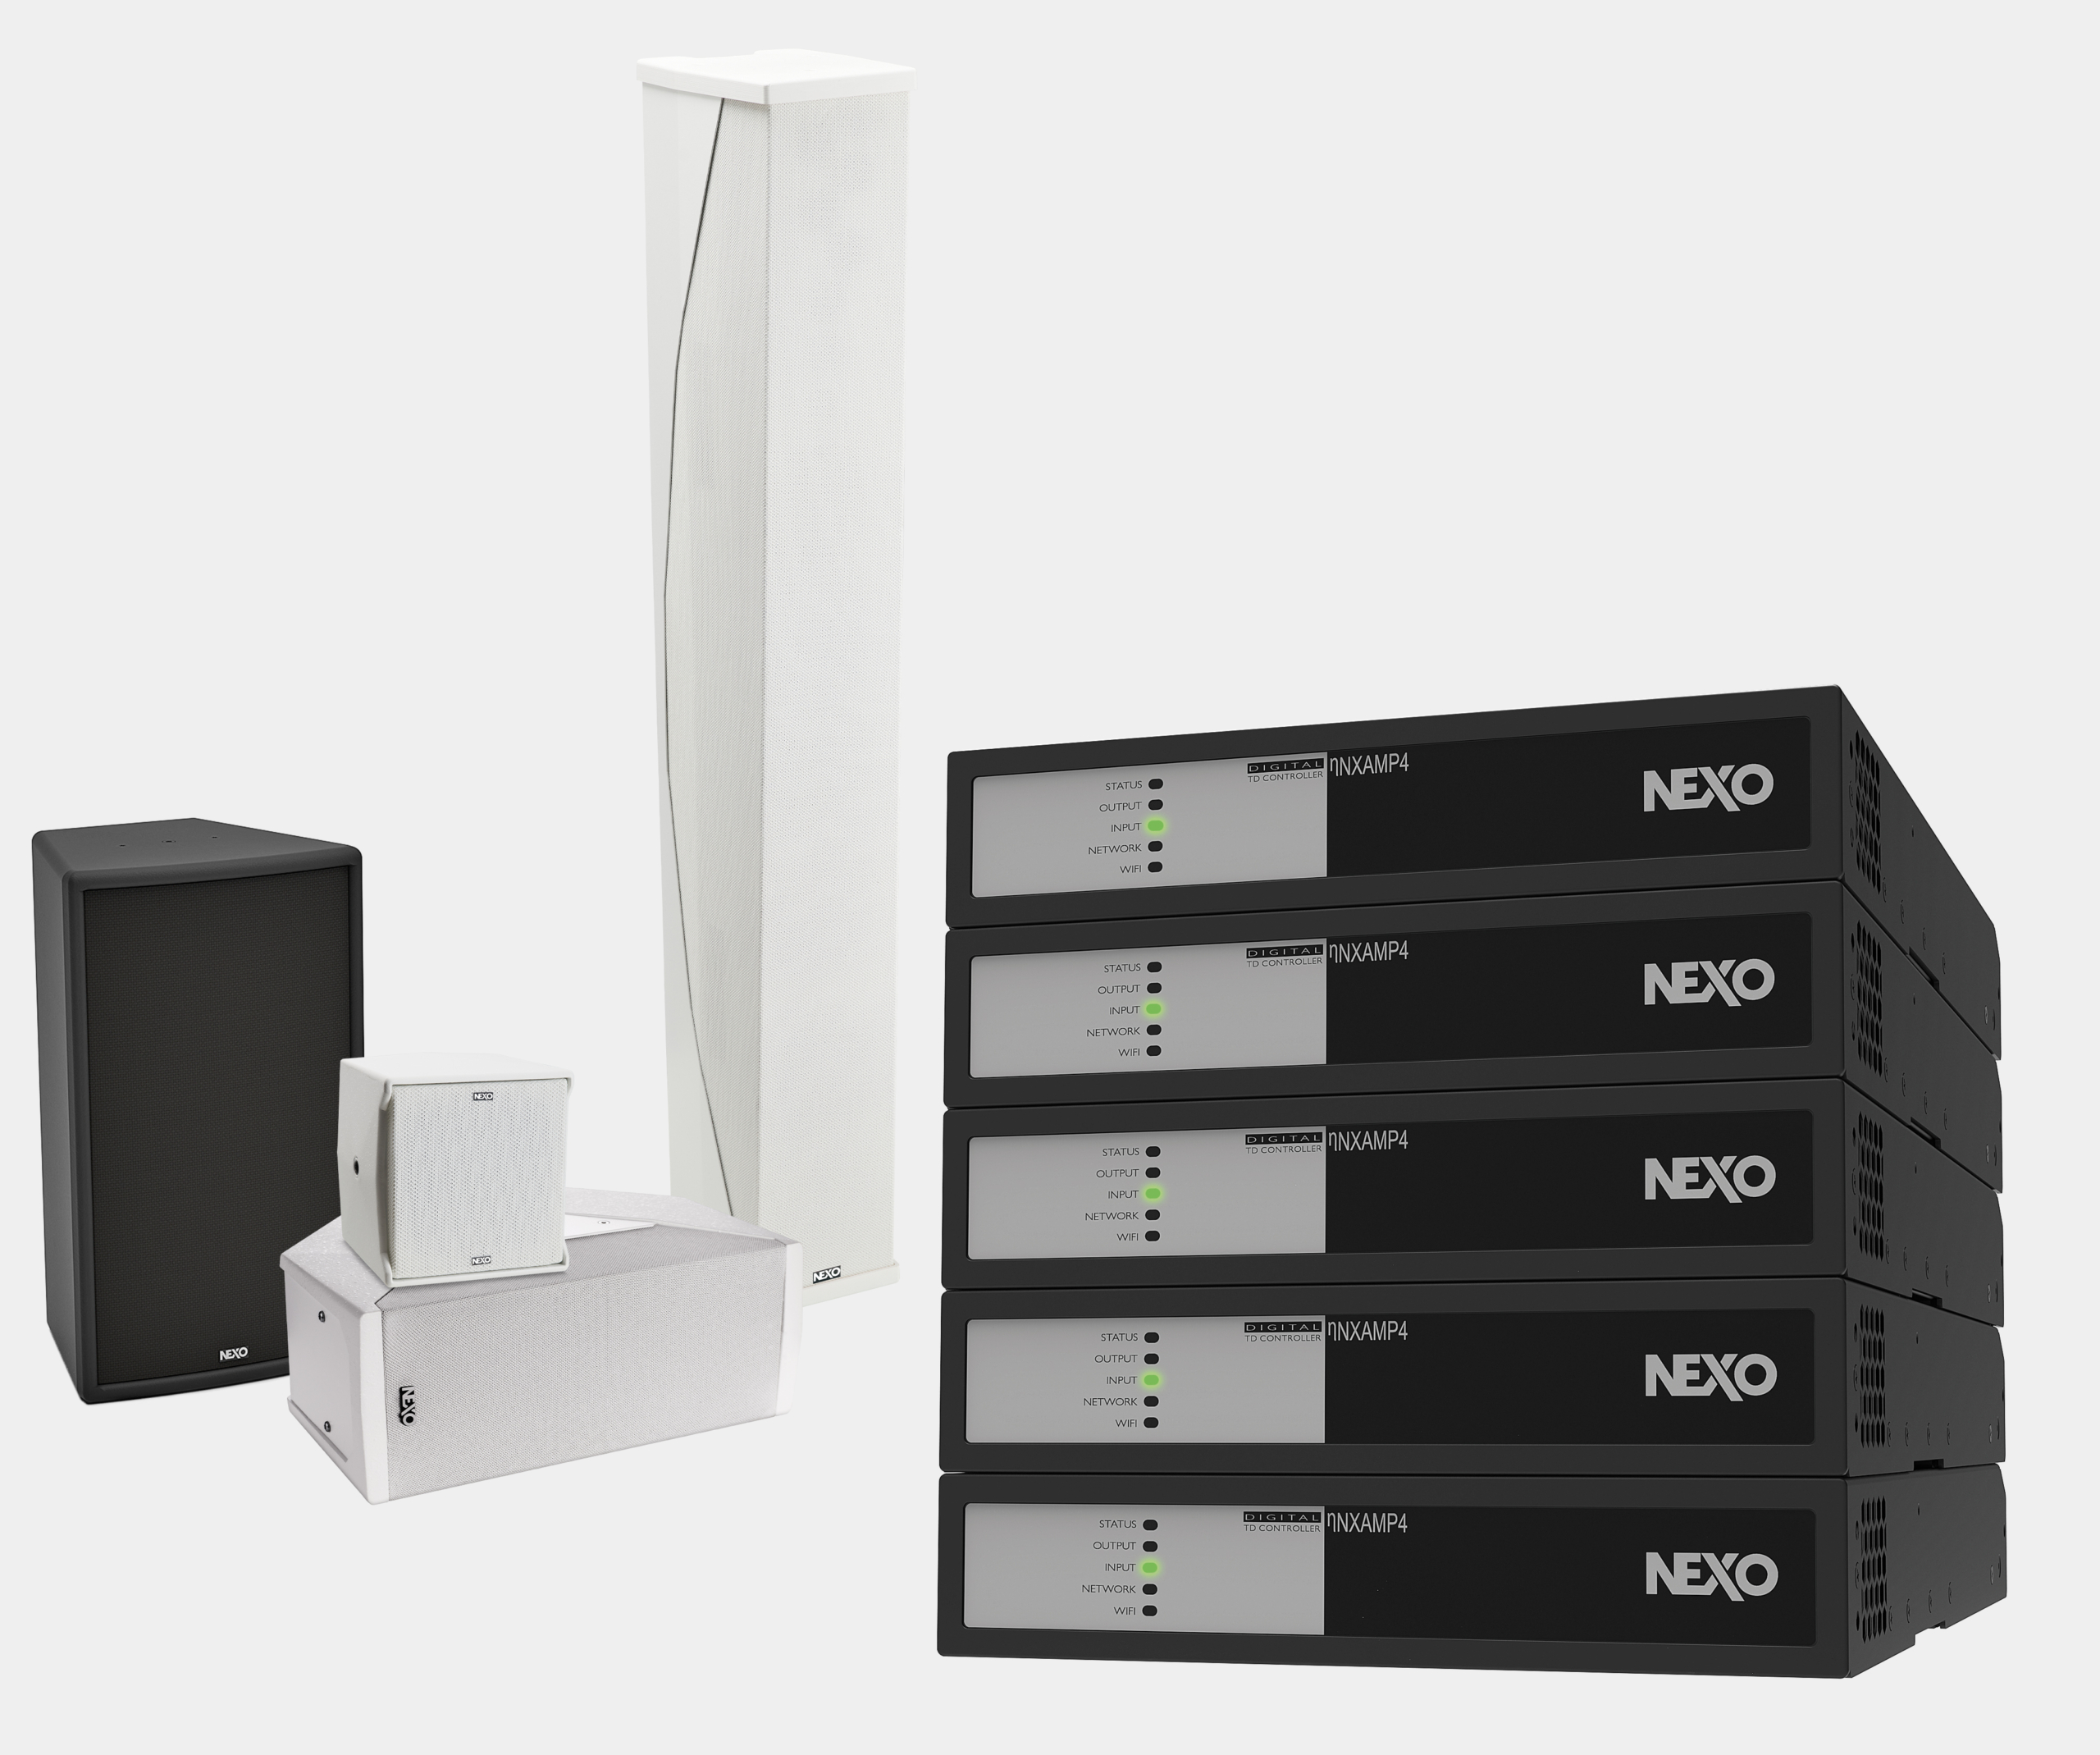 New nanoNXAMP4 Powered TD Controller significantly reduces the cost and rack space of smaller NEXO sound system installations